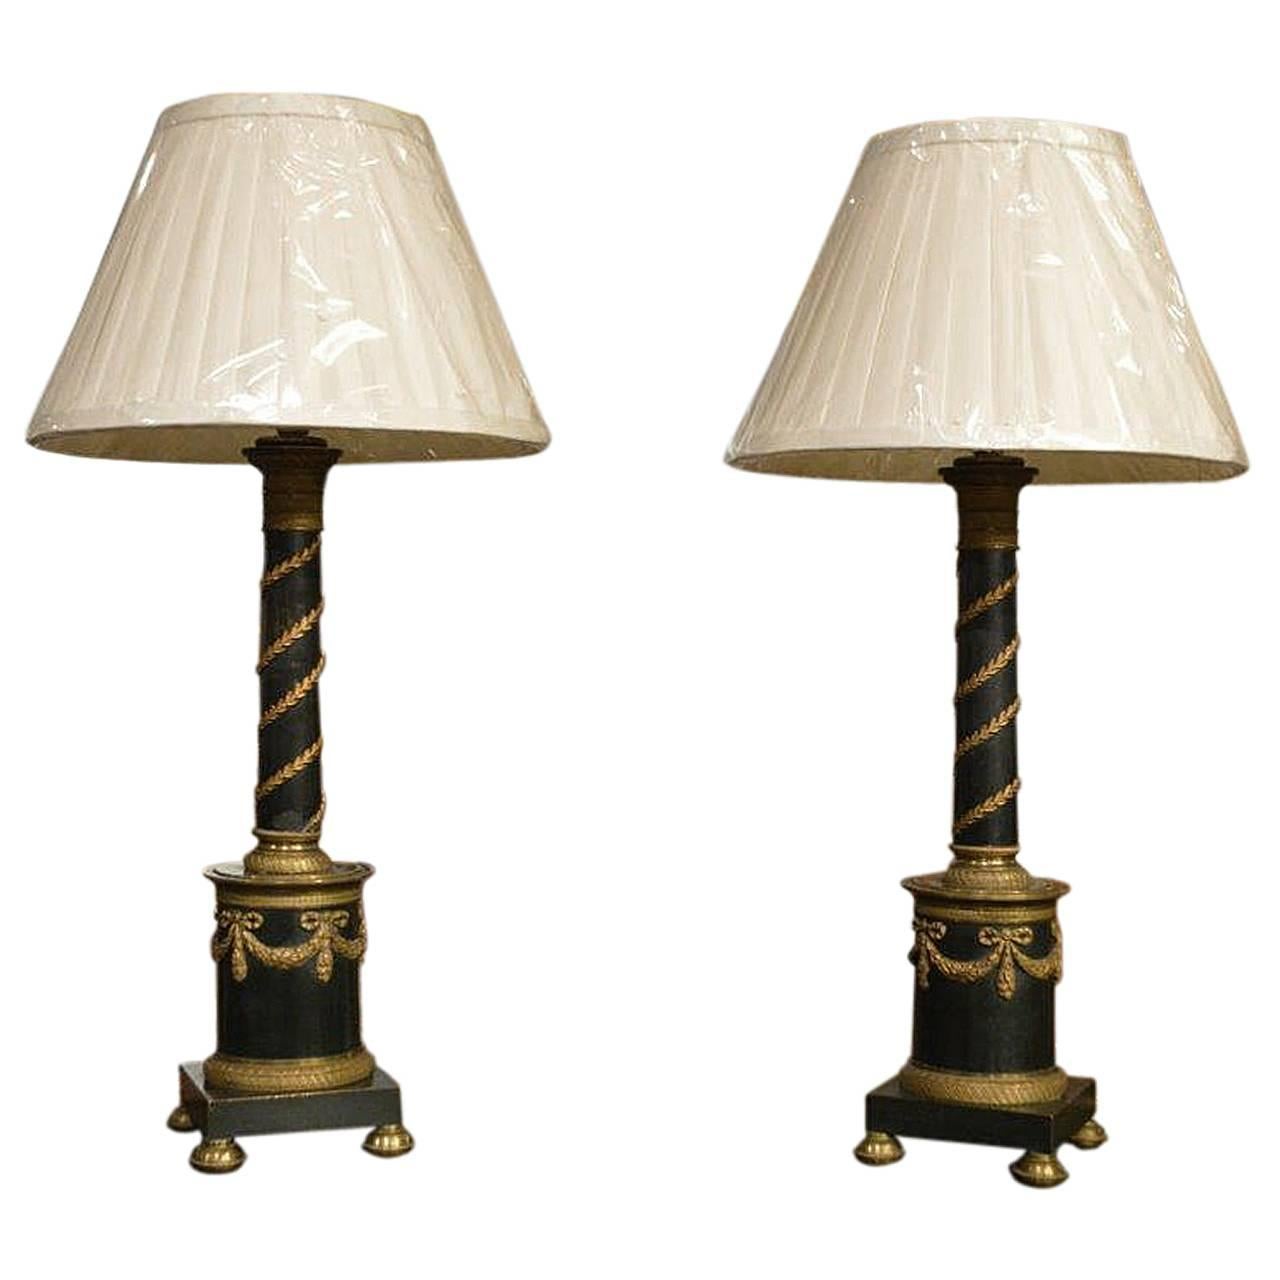 Pair of Bronze and Ormolu French Empire Style Antique Lamps